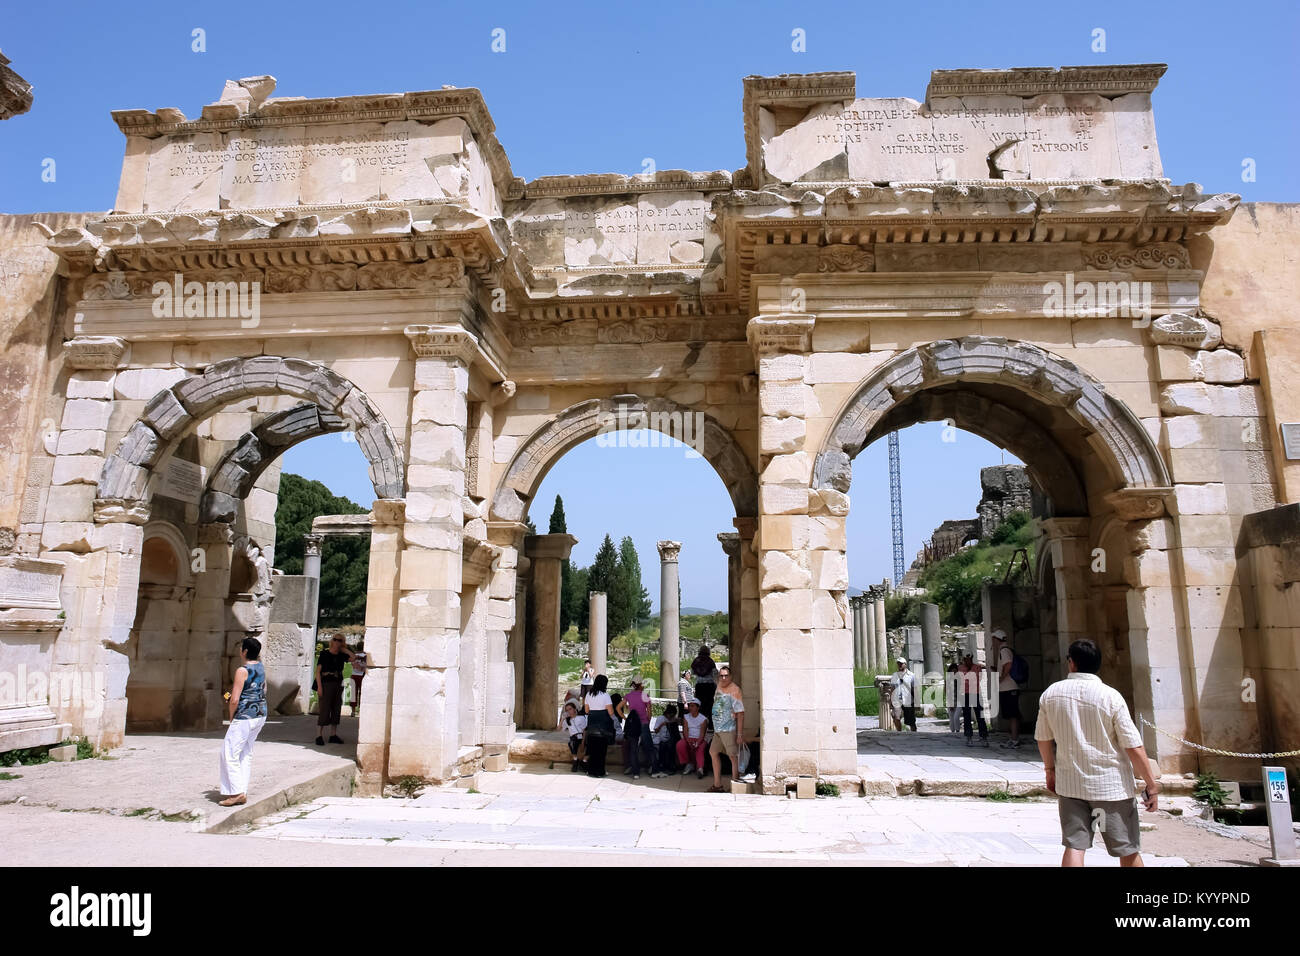 Selçuk, Turkey - April 21, 2008: View on old  monumental Gate of Augustus in the ancient city of Ephesus. Stock Photo